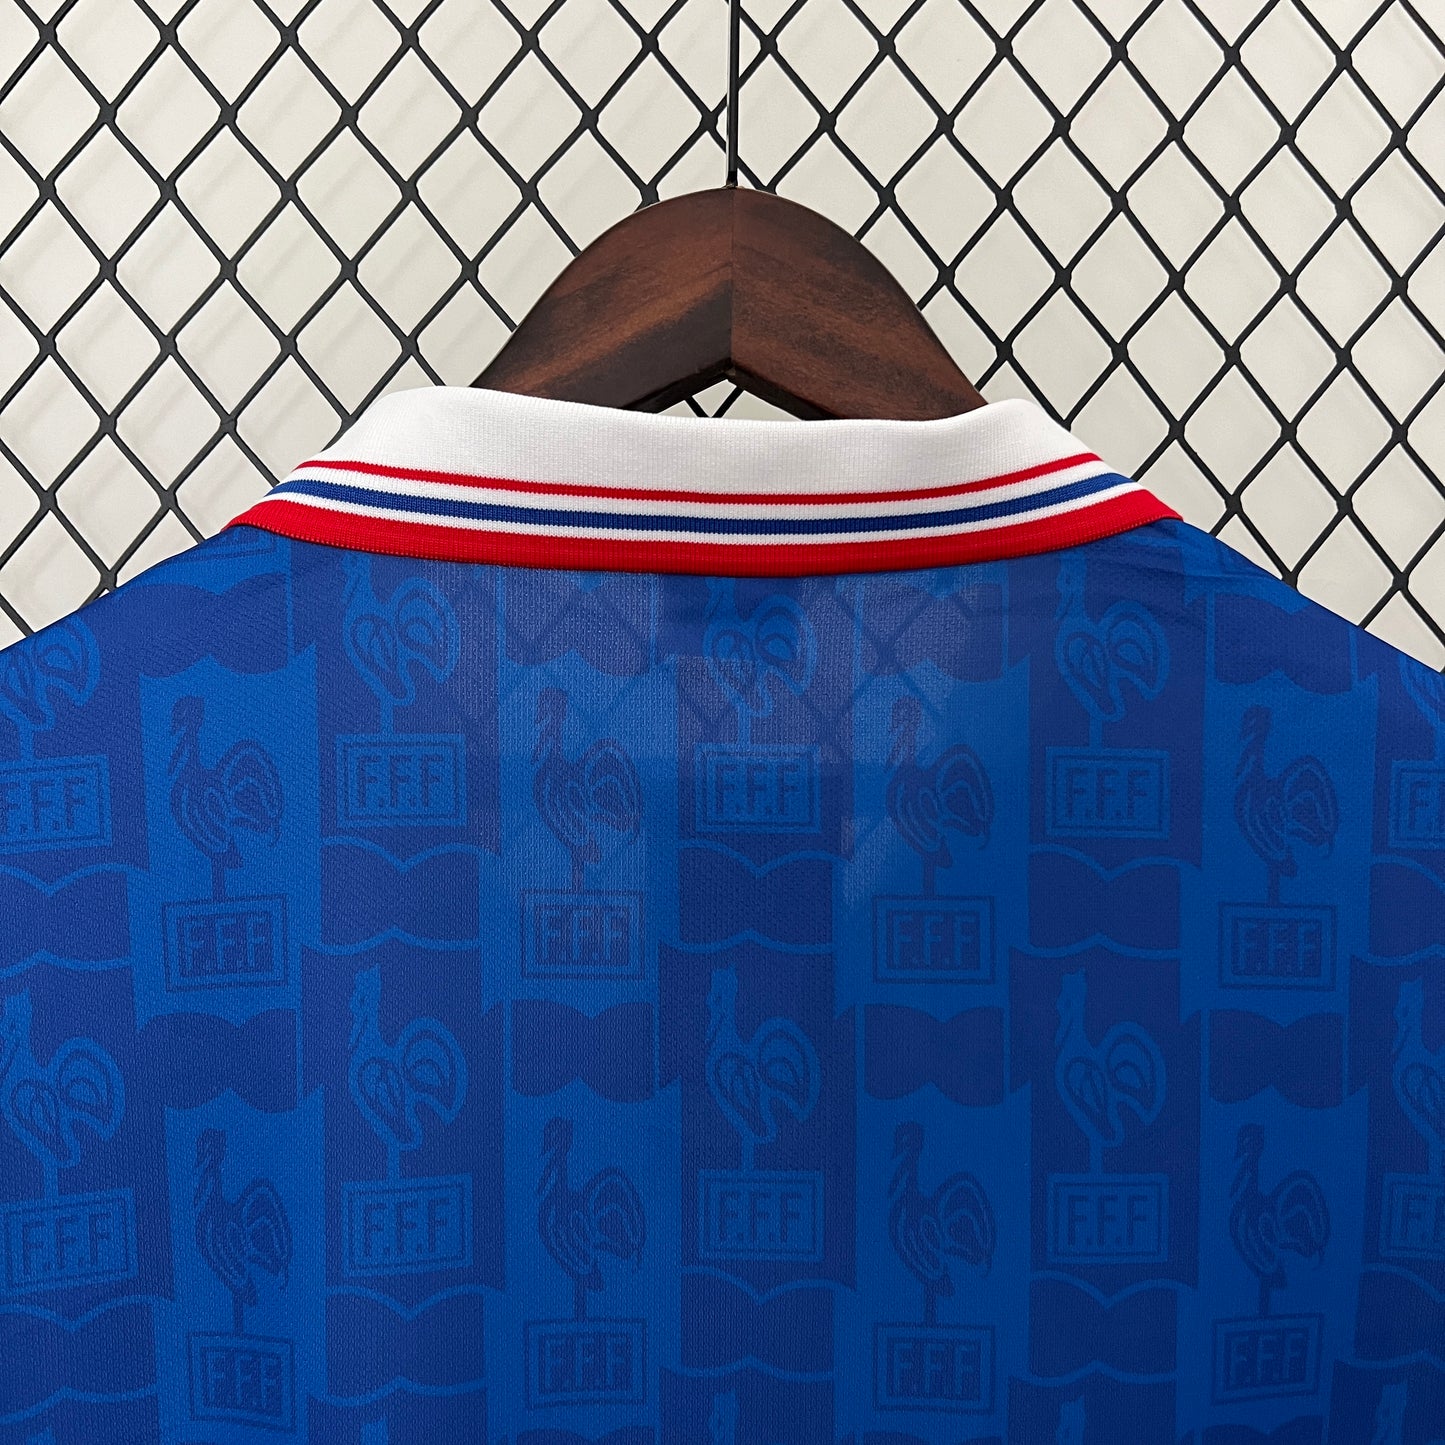 FRANCE 1996 HOME JERSEY